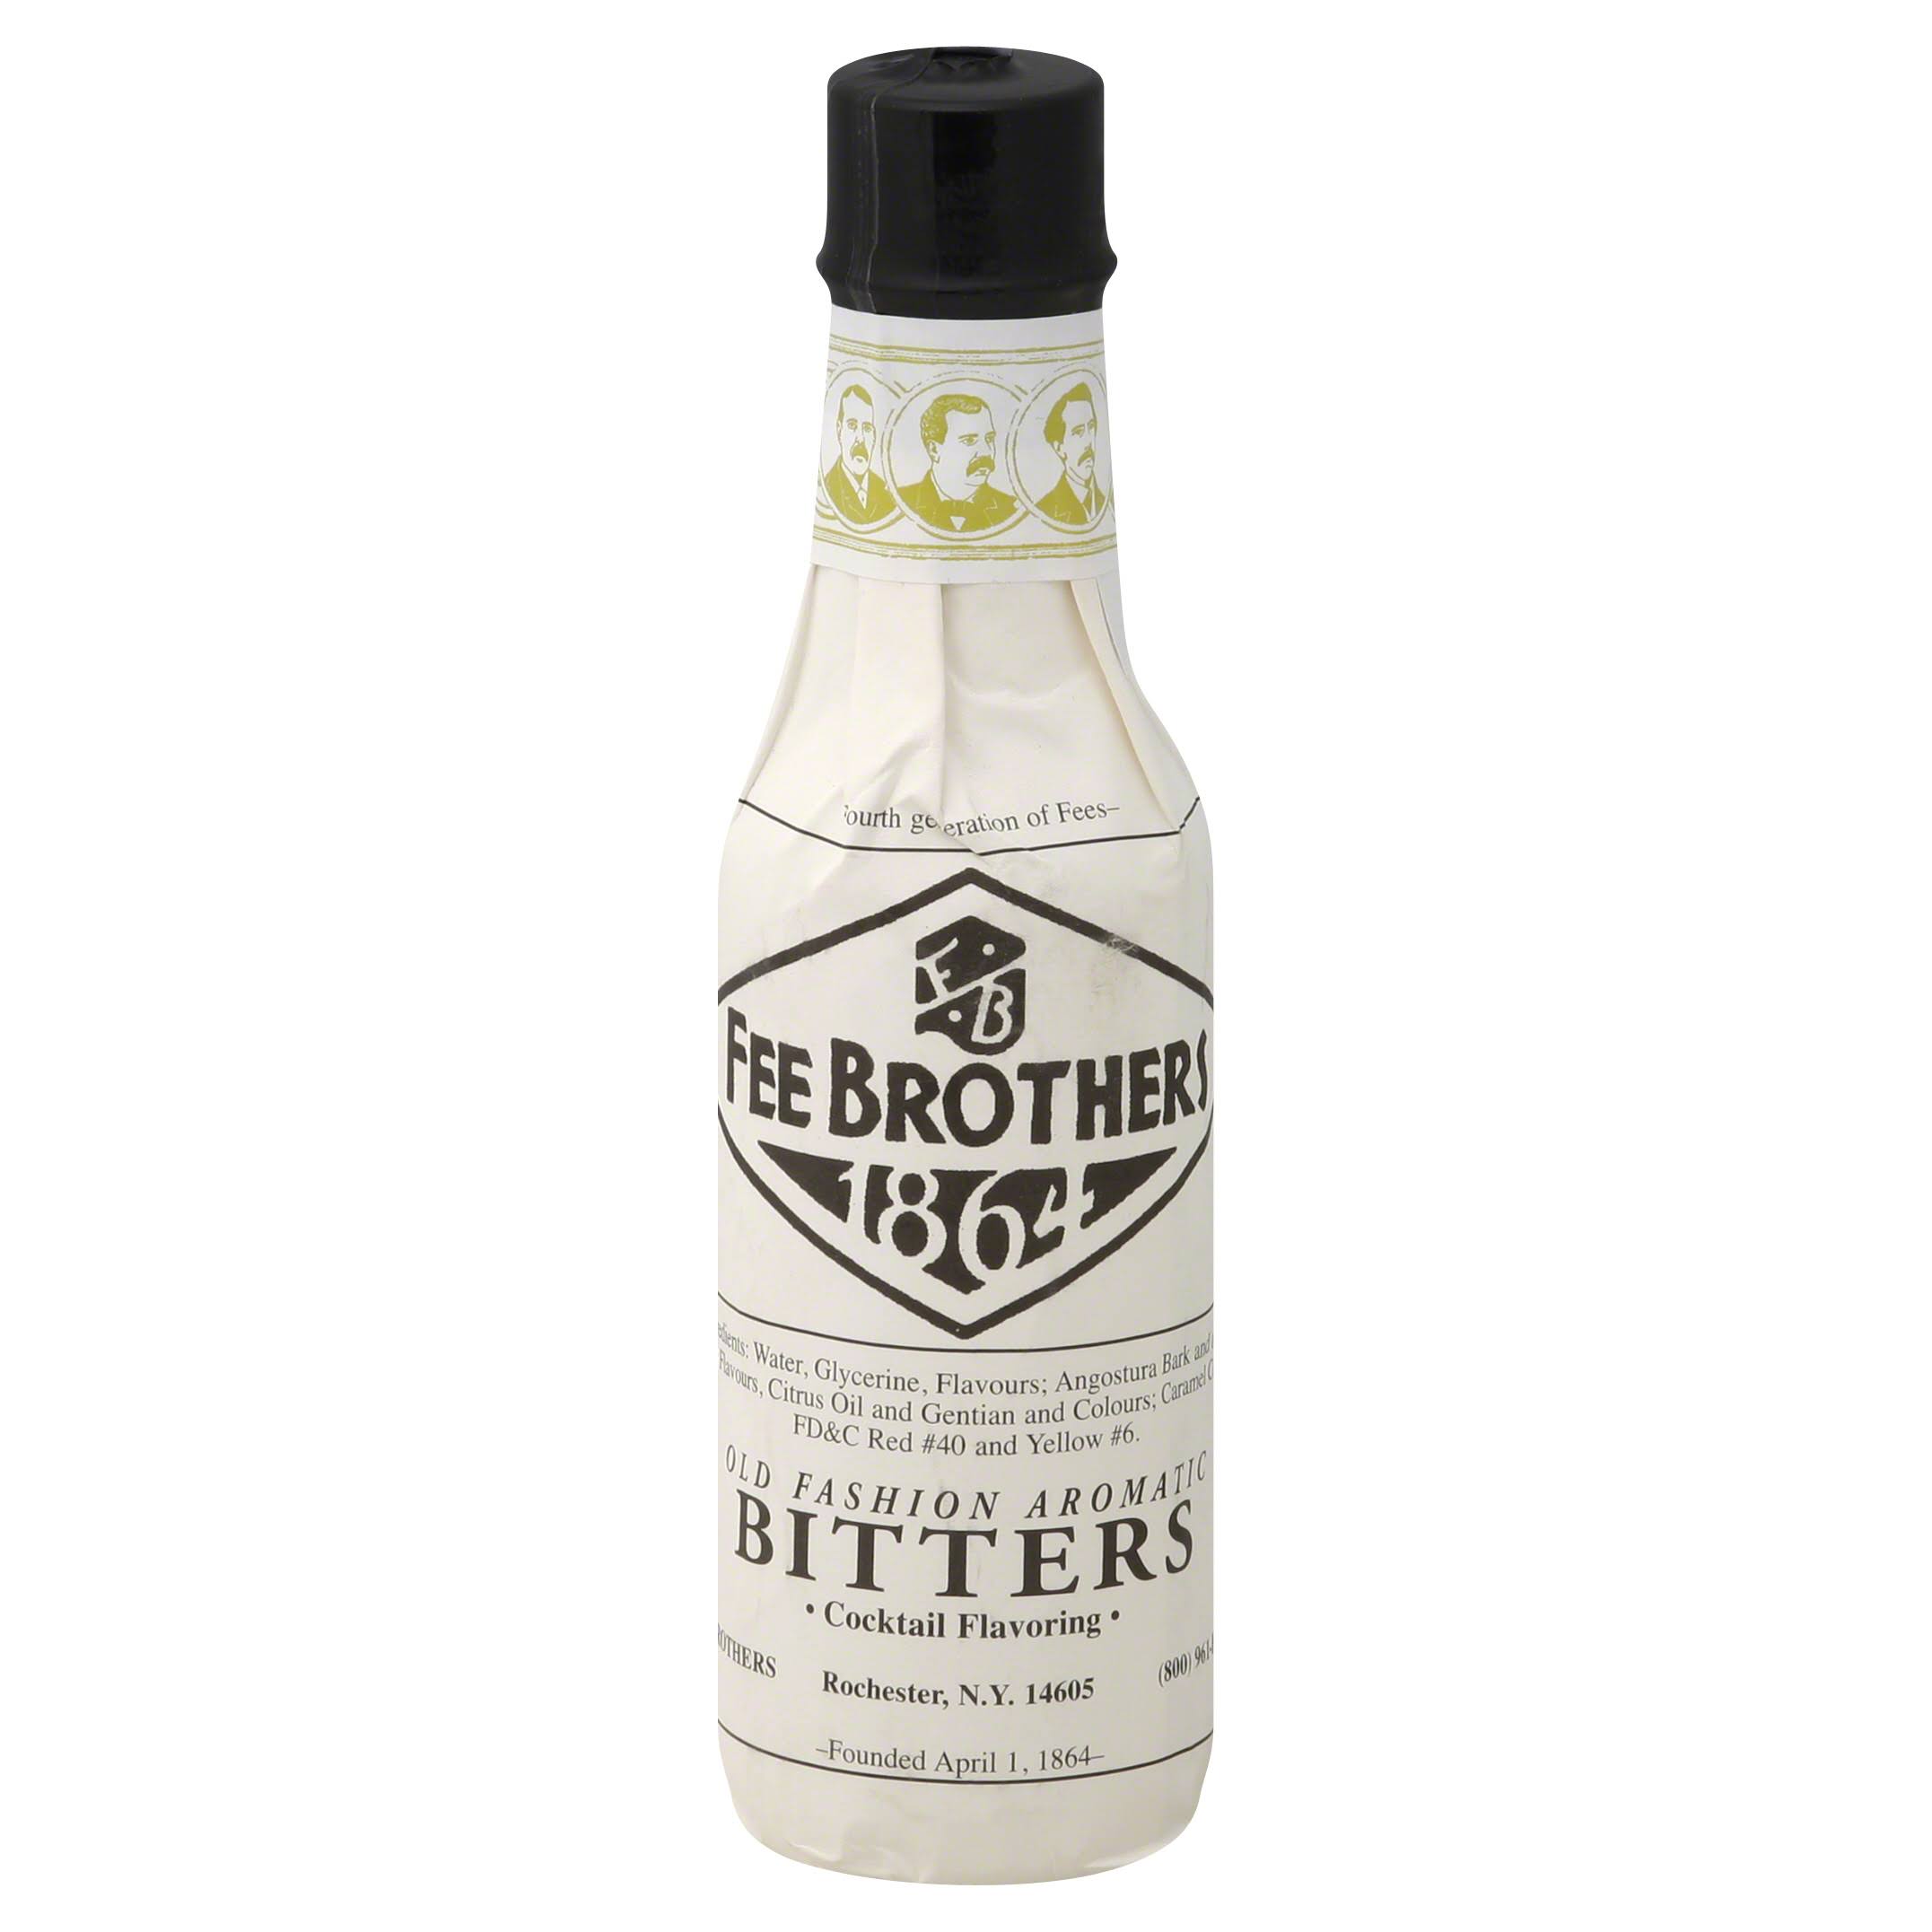 Fee Brothers Bitters, Old Fashion Aromatic - 5 fl oz